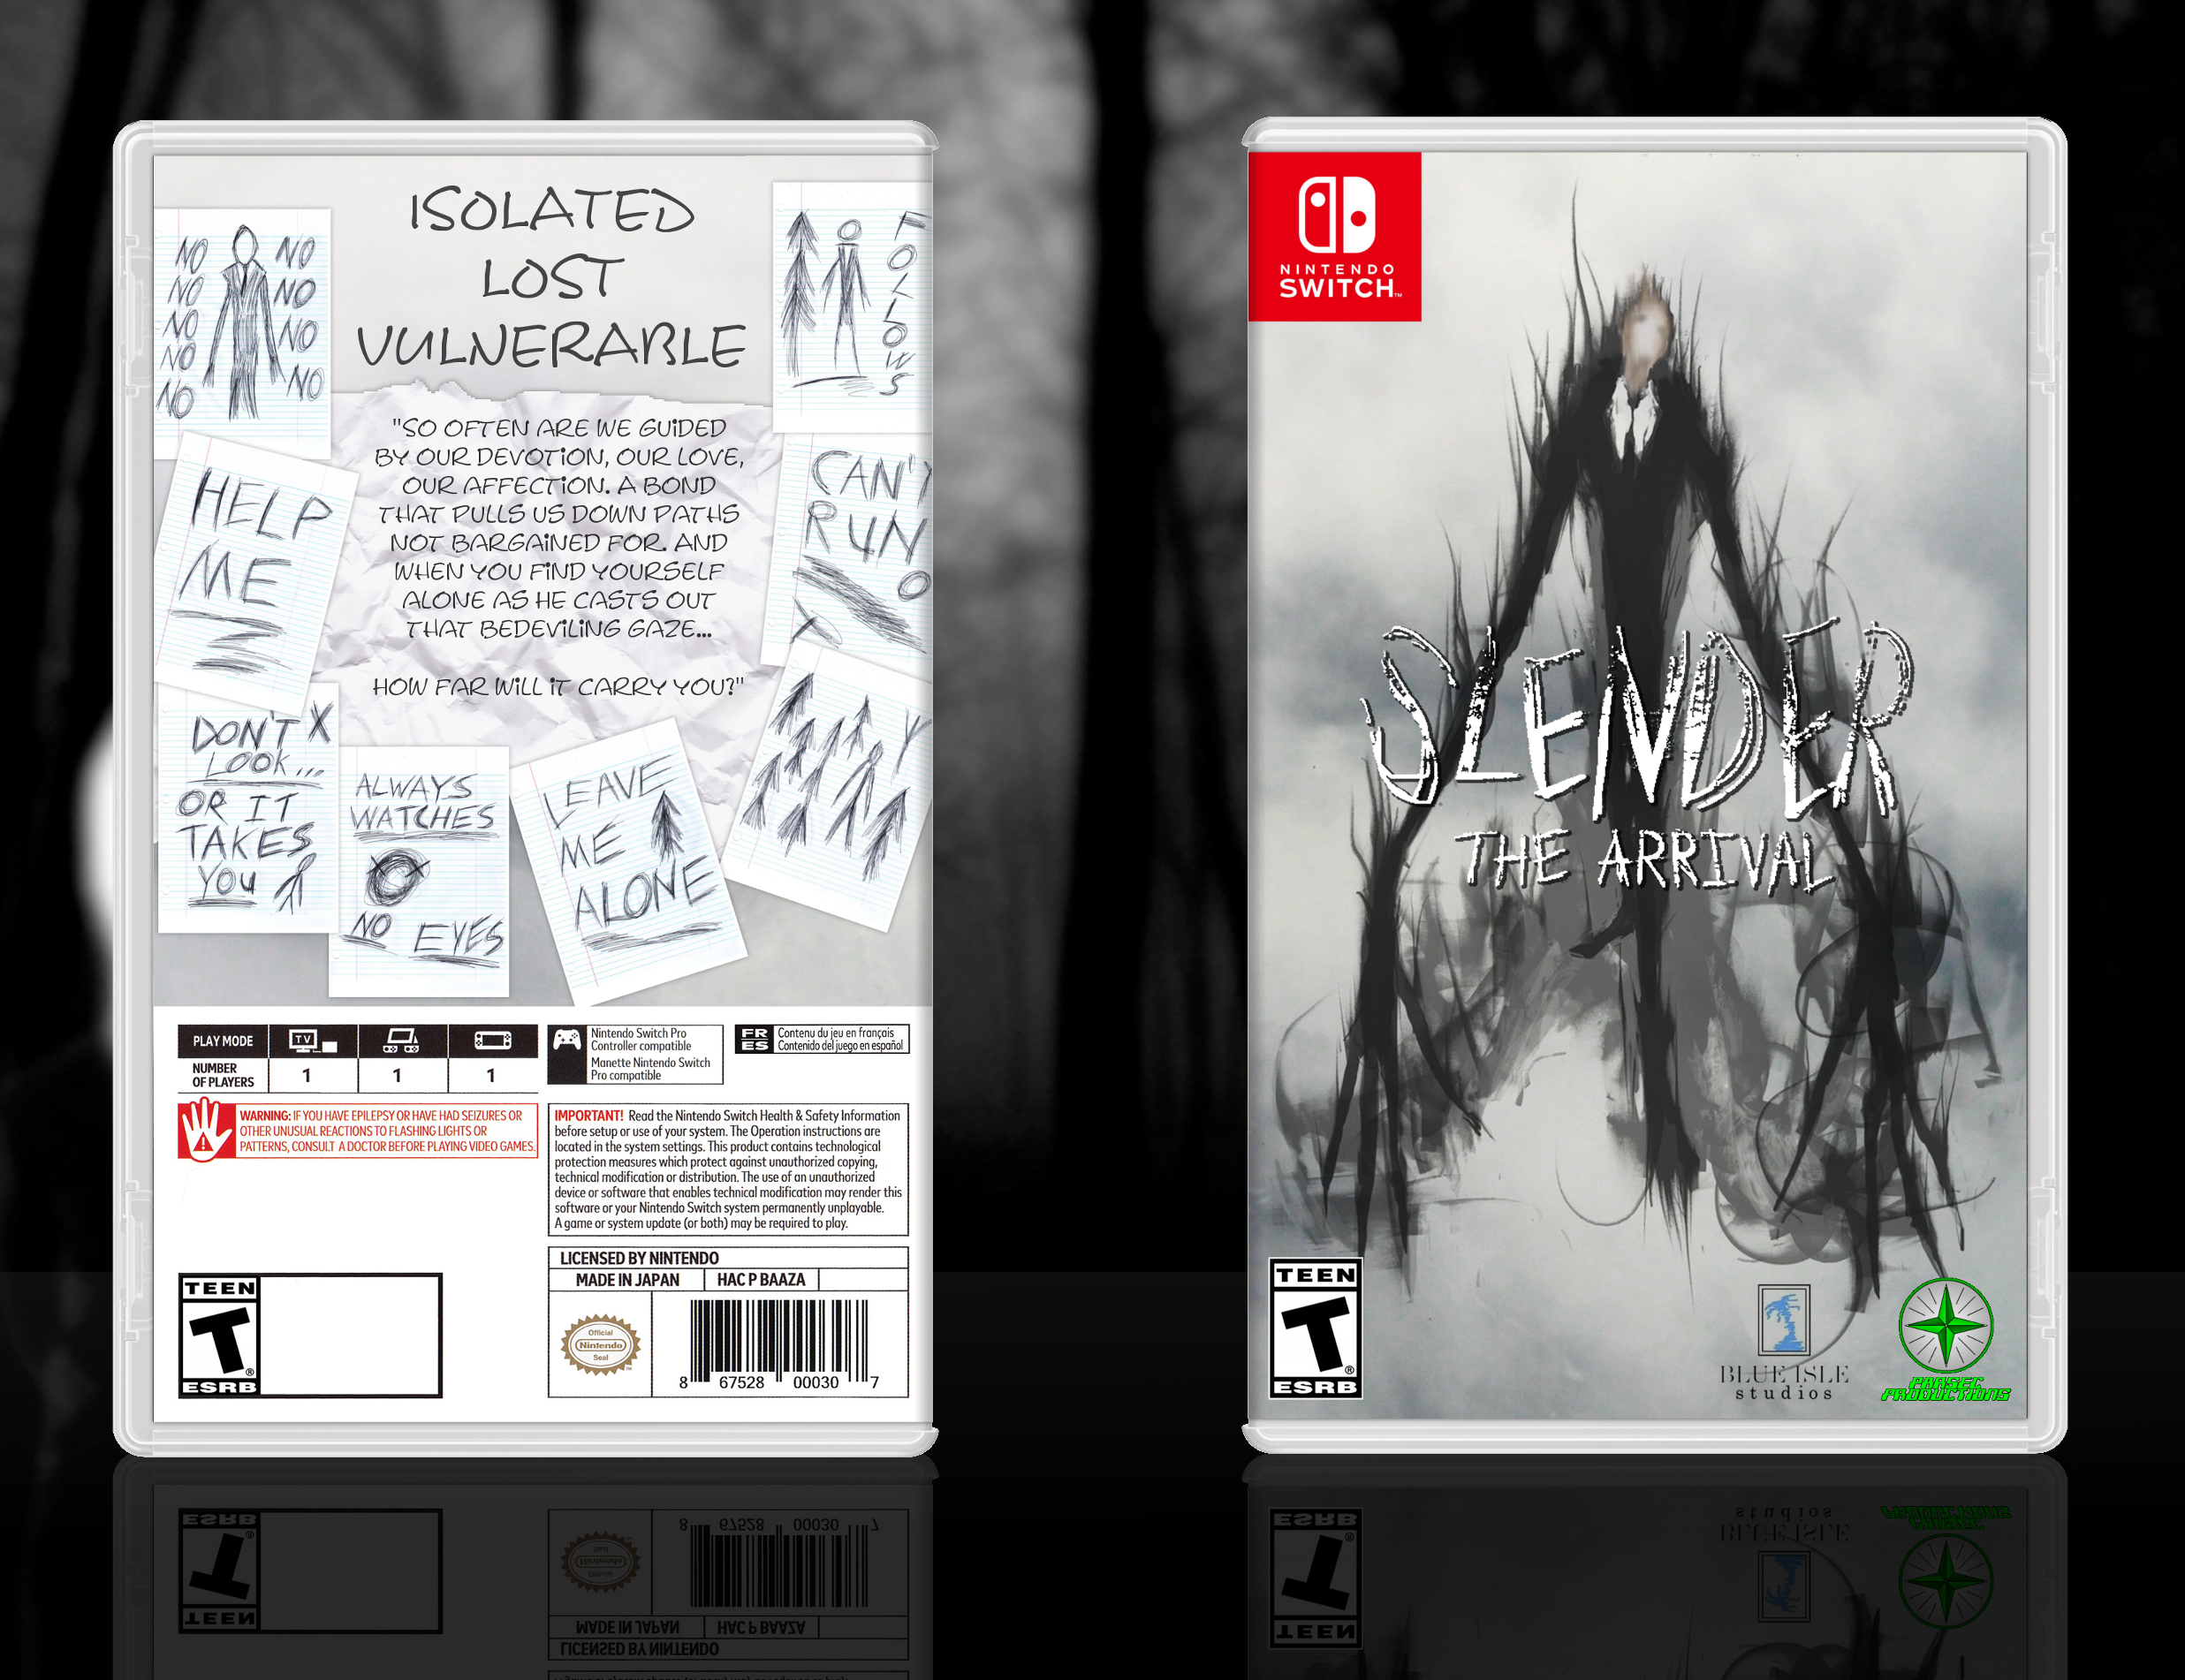 Slender: The Arrival box cover